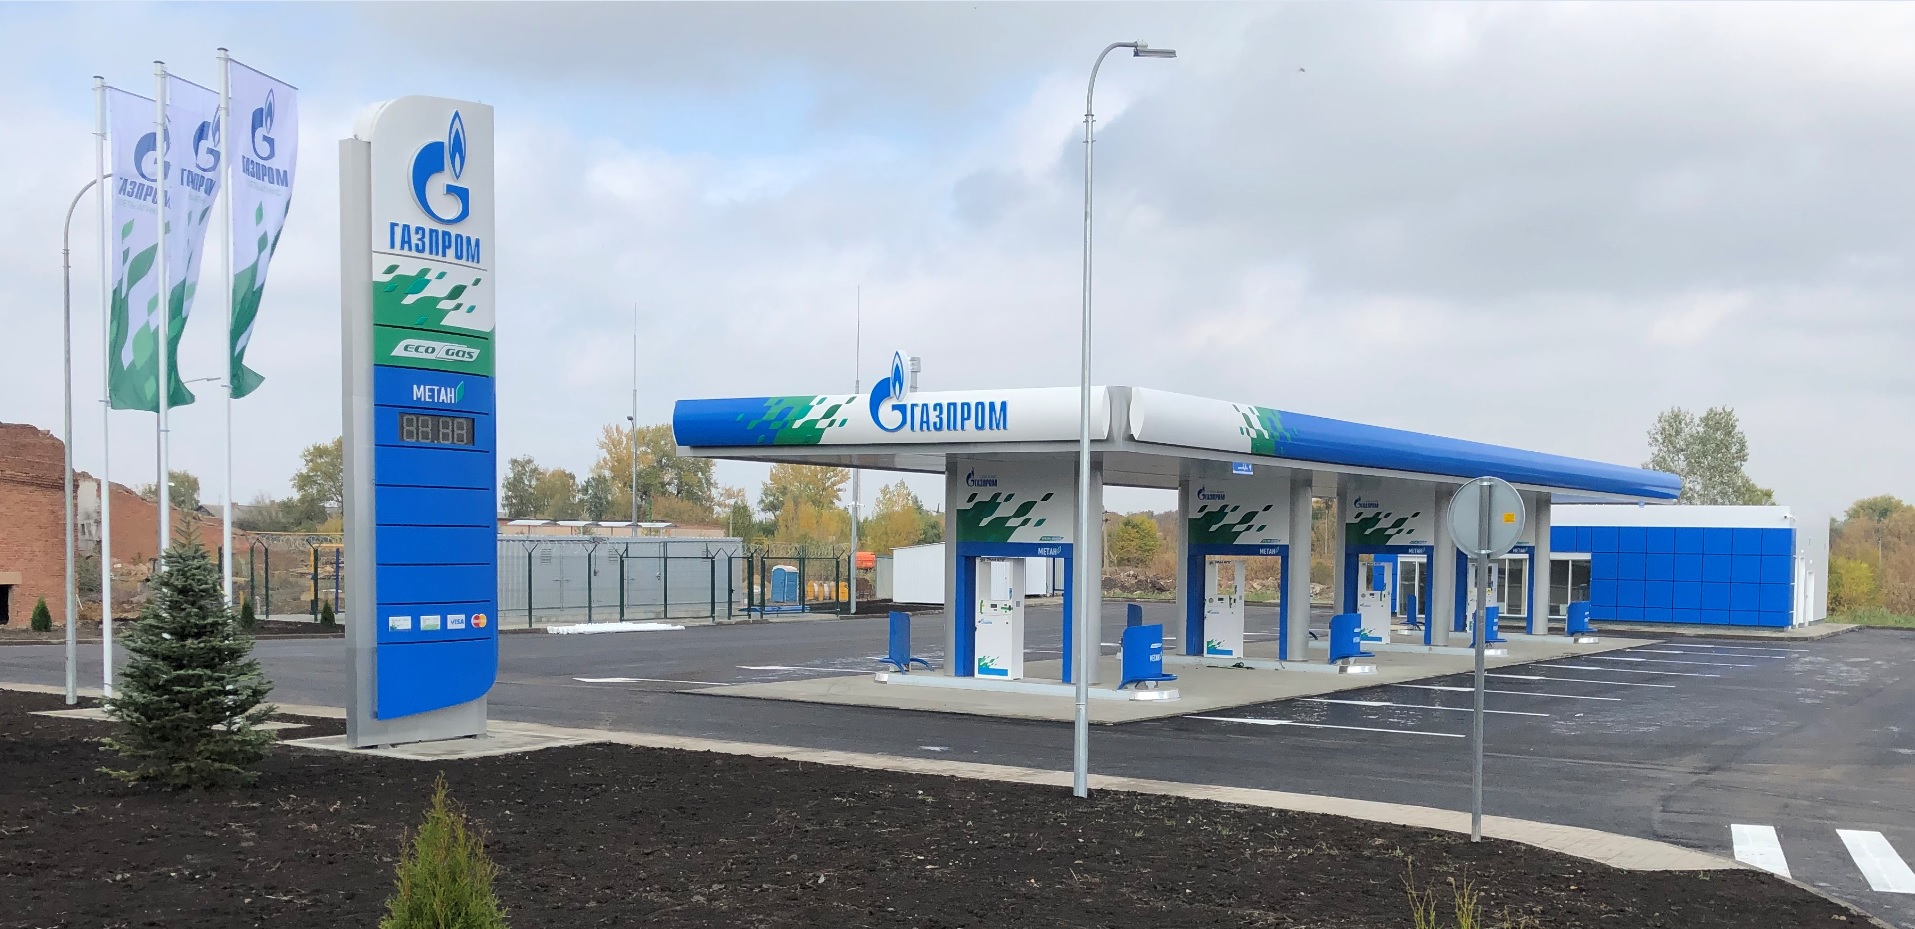 Gazprom increases domestic sales of natural gas as vehicle fuel by 30 per cent in 2019